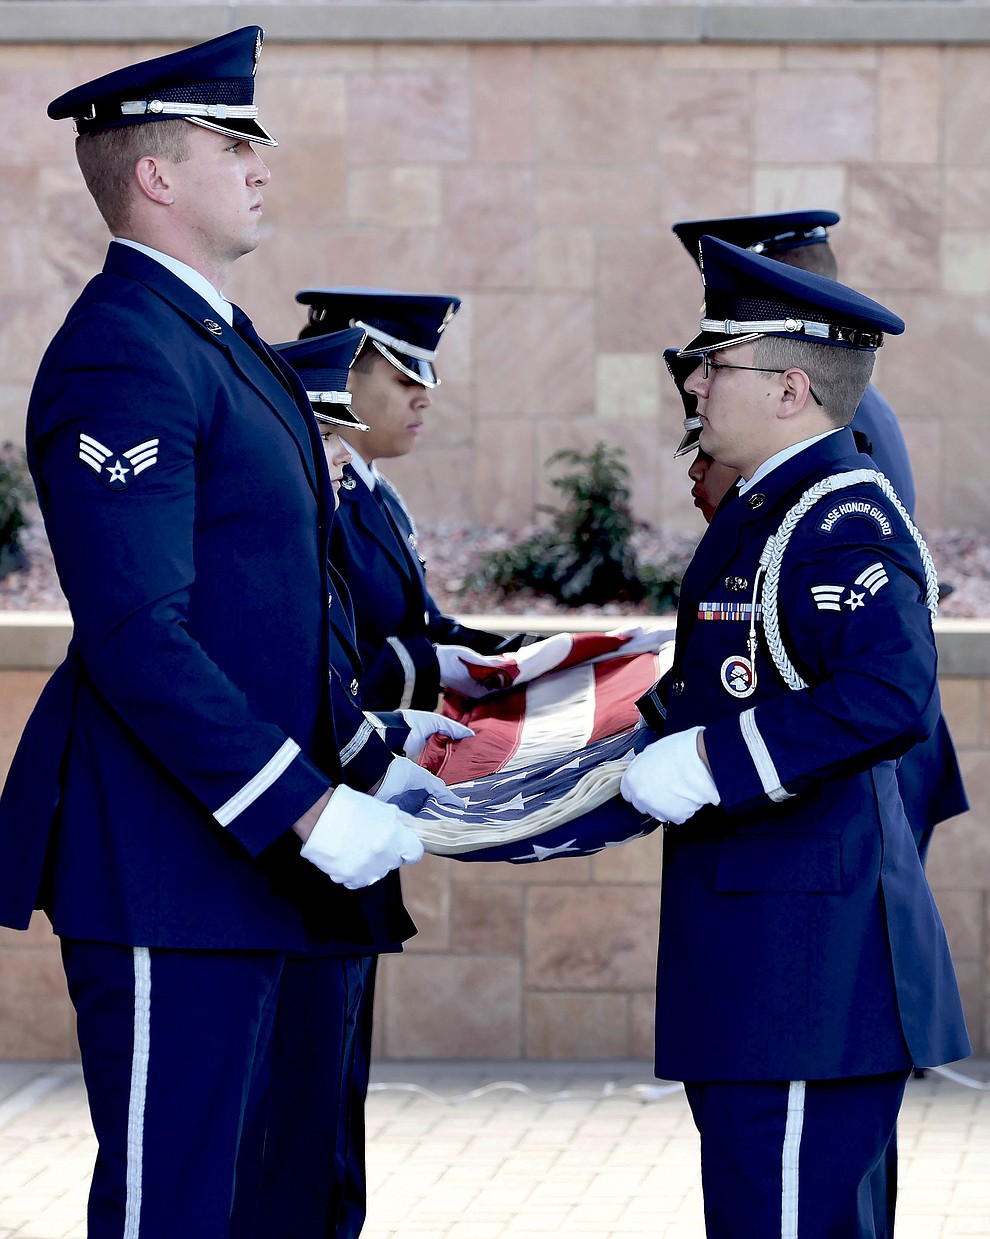 Members of the Luke Air Force Base Honor Guard fold an American flag at the Prescott National Cemetery during the funeral for Air Force Brigadier General Duane Harold "Leif" Erickson in Prescott.